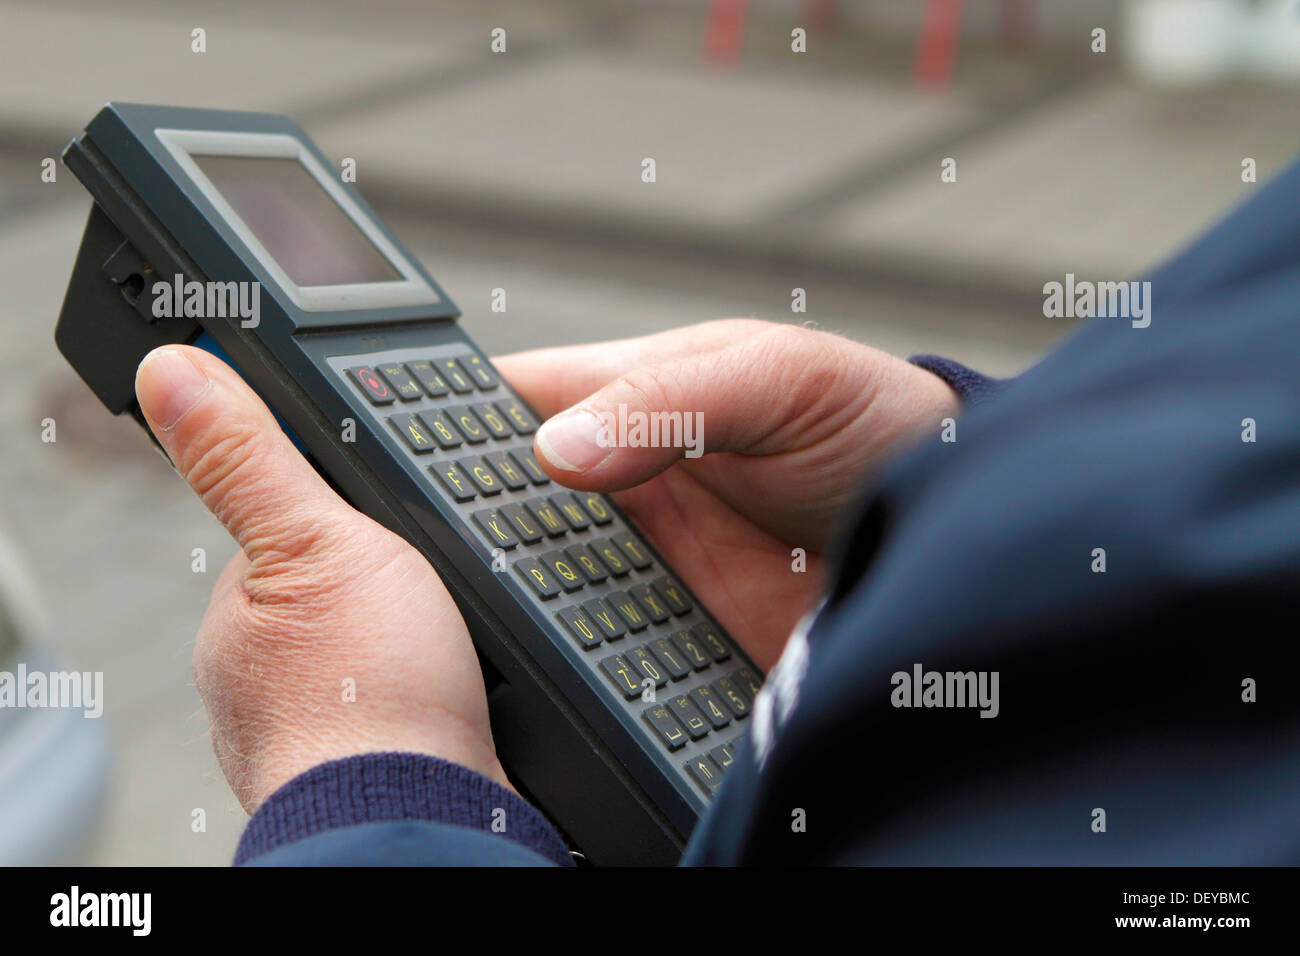 Employee of the regulatory authority entering data into a electronic input device, Bergisches Land region Stock Photo